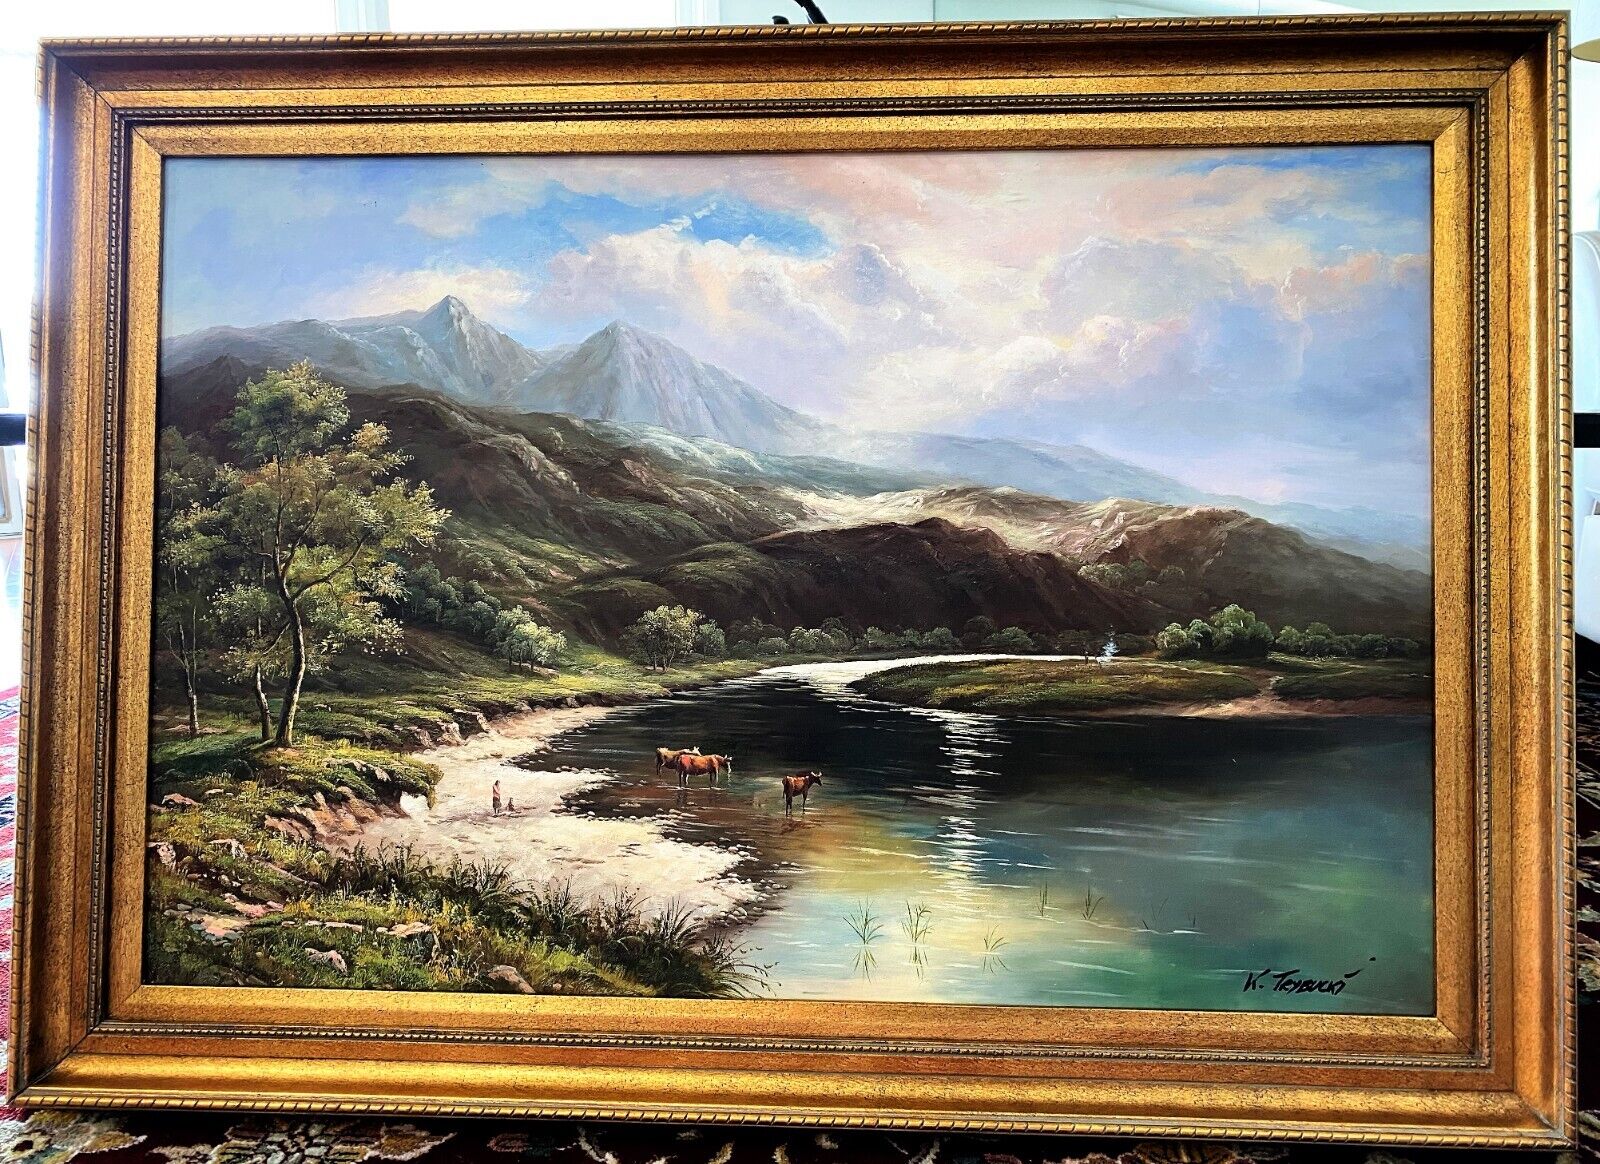 Very large oil on canvas painting - lakeshore landscape - modern gold frame